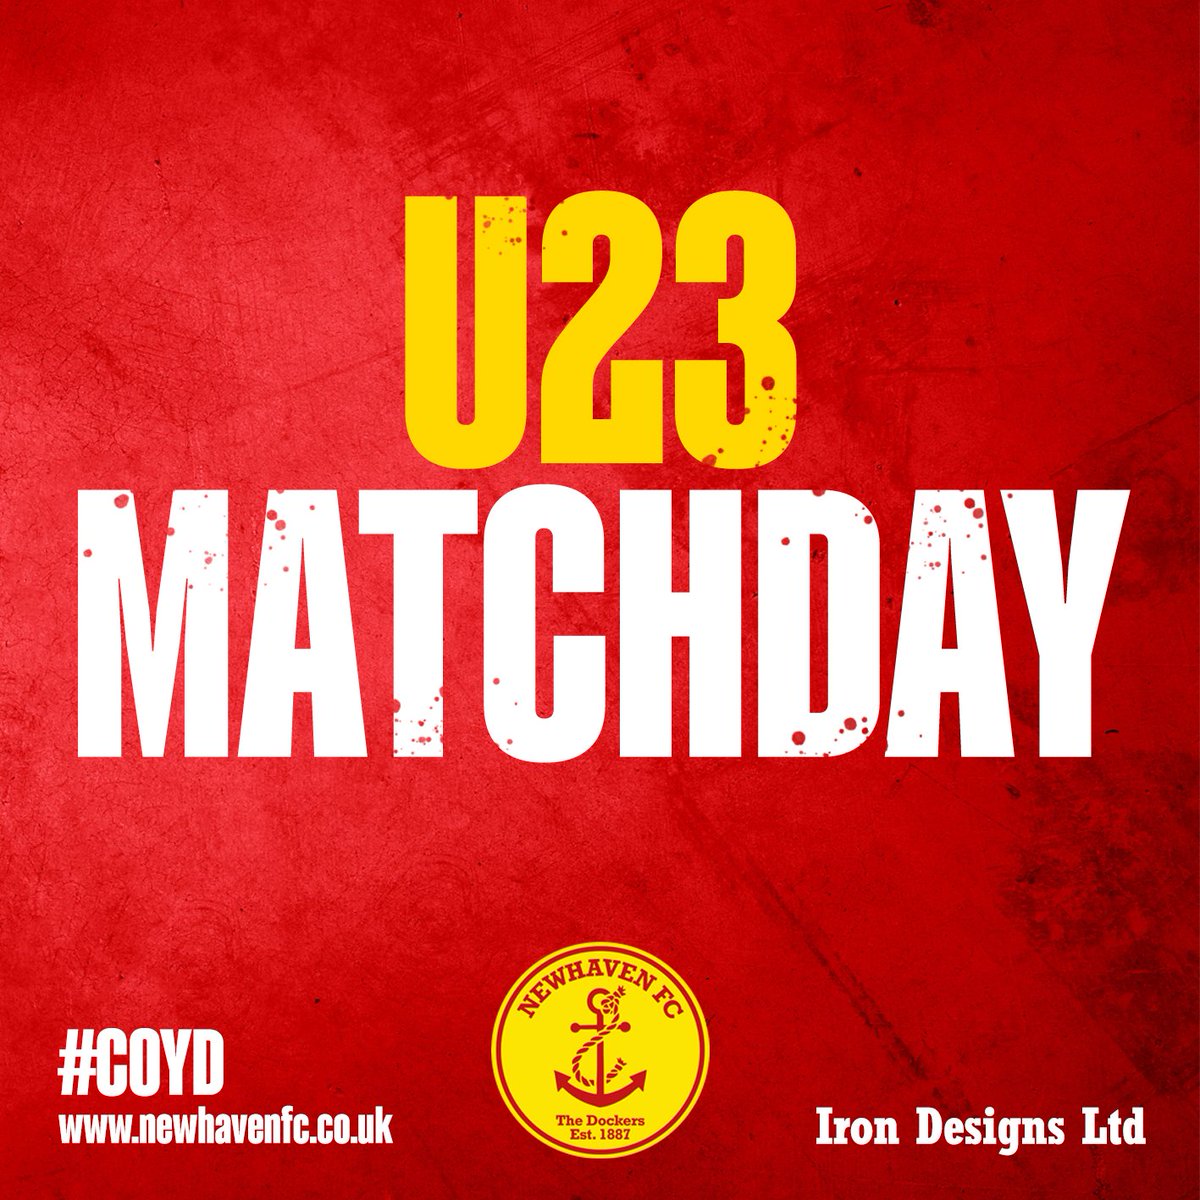 🔴🟡⚽️ 𝗨𝟮𝟯 𝗠𝗮𝘁𝗰𝗵 𝗗𝗮𝘆! Our Under-23s are in Mind Charity Cup action tonight as they travel the short distance to the Sports Park to take on @PT_FC. Kick off is at 7.45pm and entry is by donation to @MindCharity. #COYD